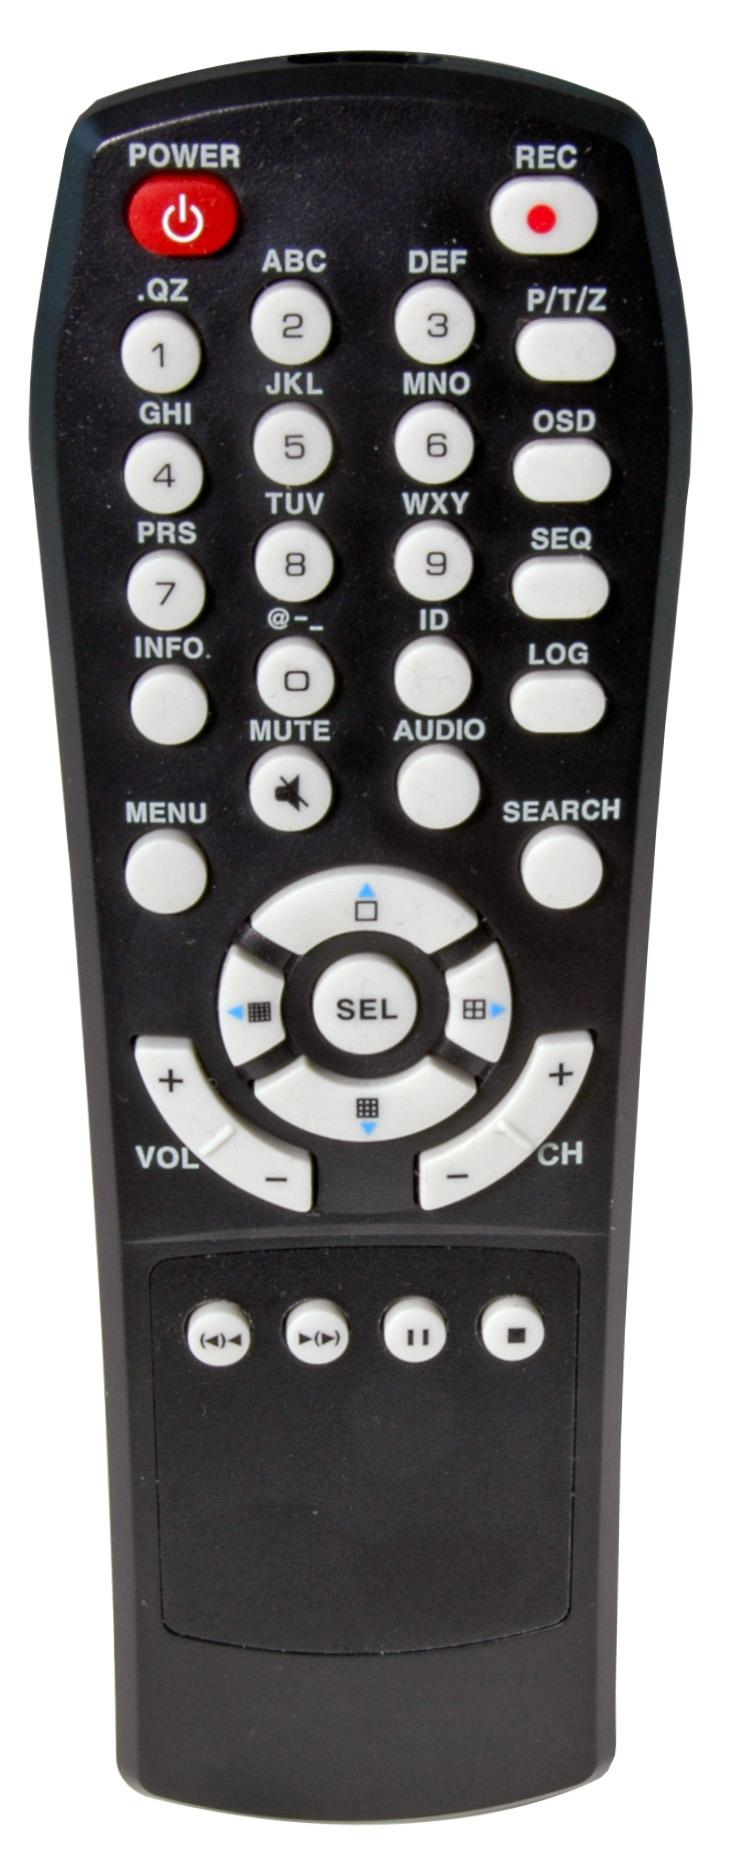 Remote Control Remote Control Listed below is a quick reference for the Remote Control.